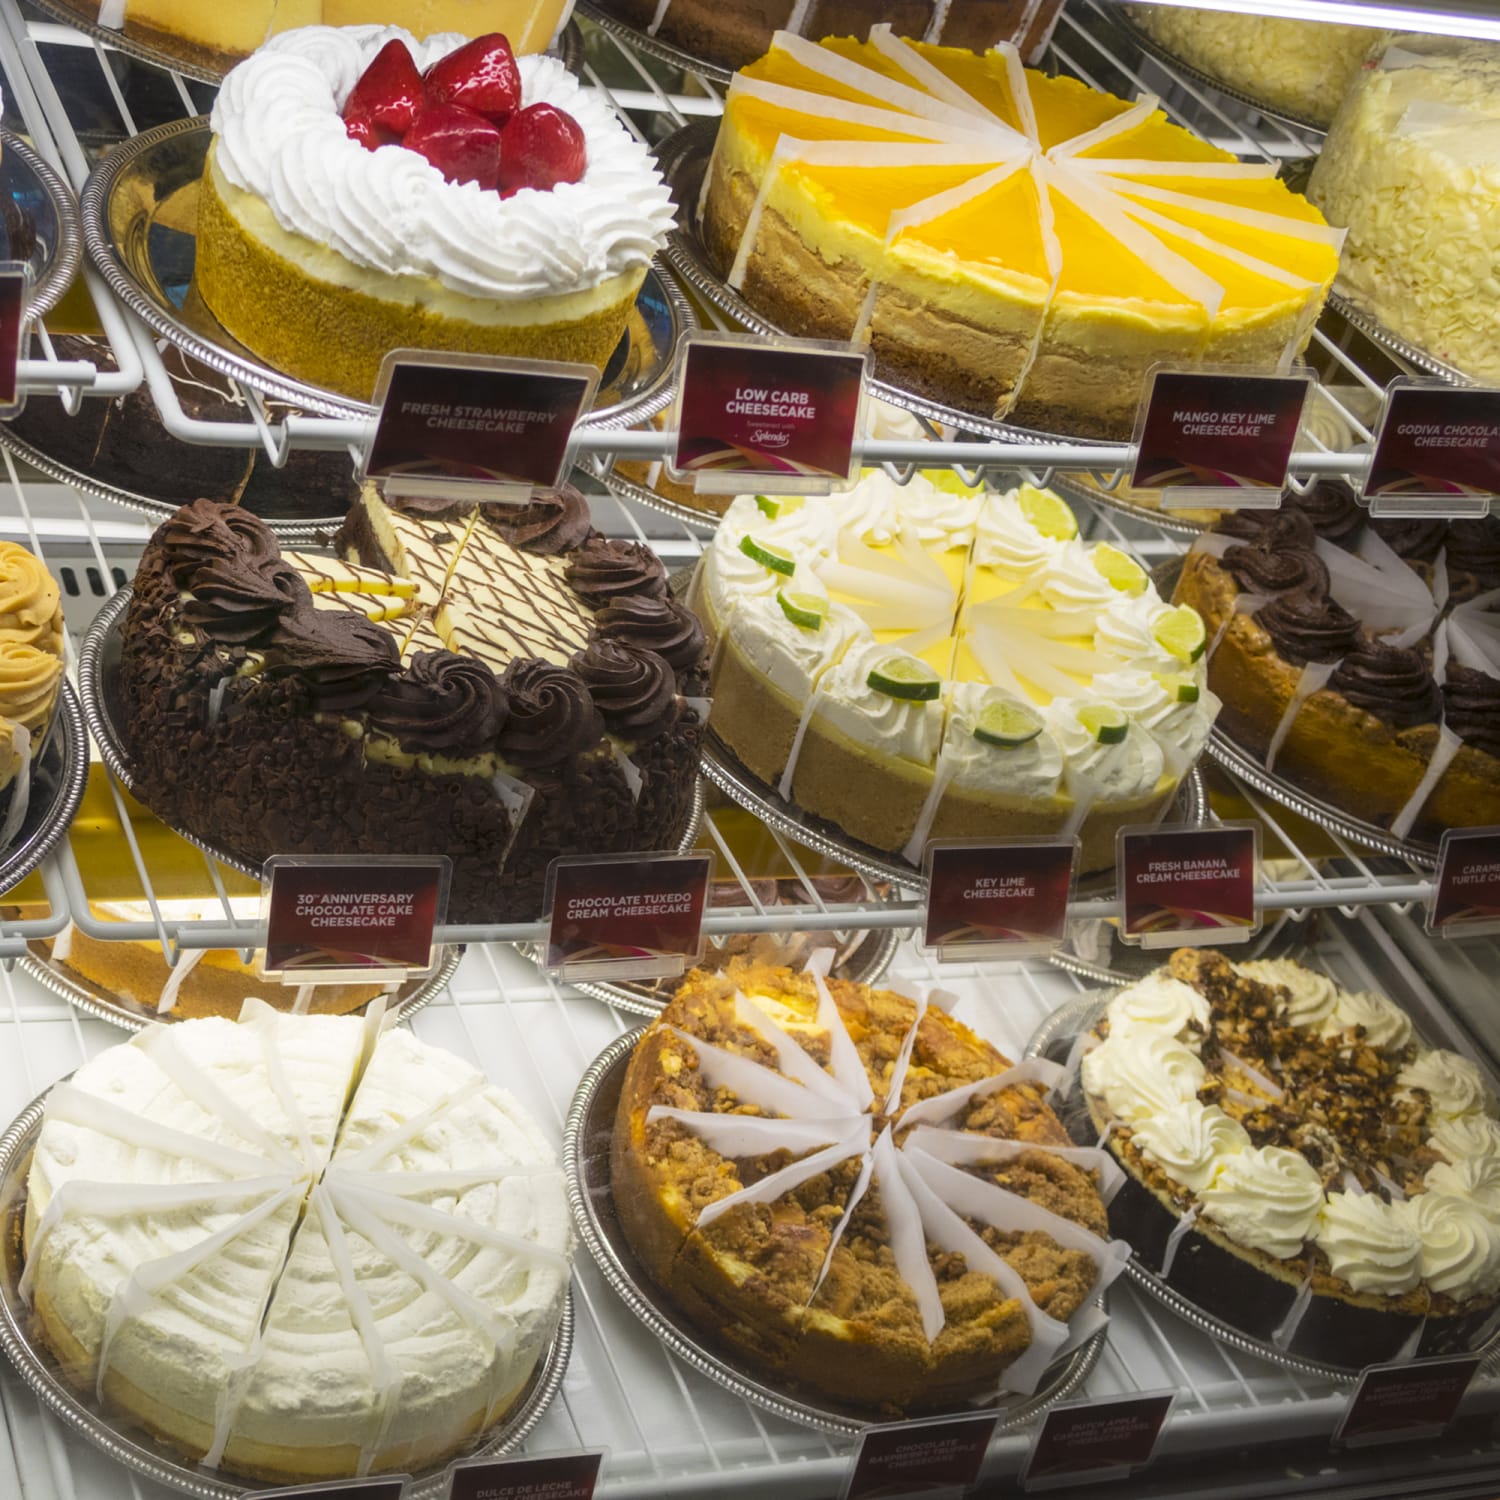 The Cheesecake Factory giving away free cheesecake with DoorDash